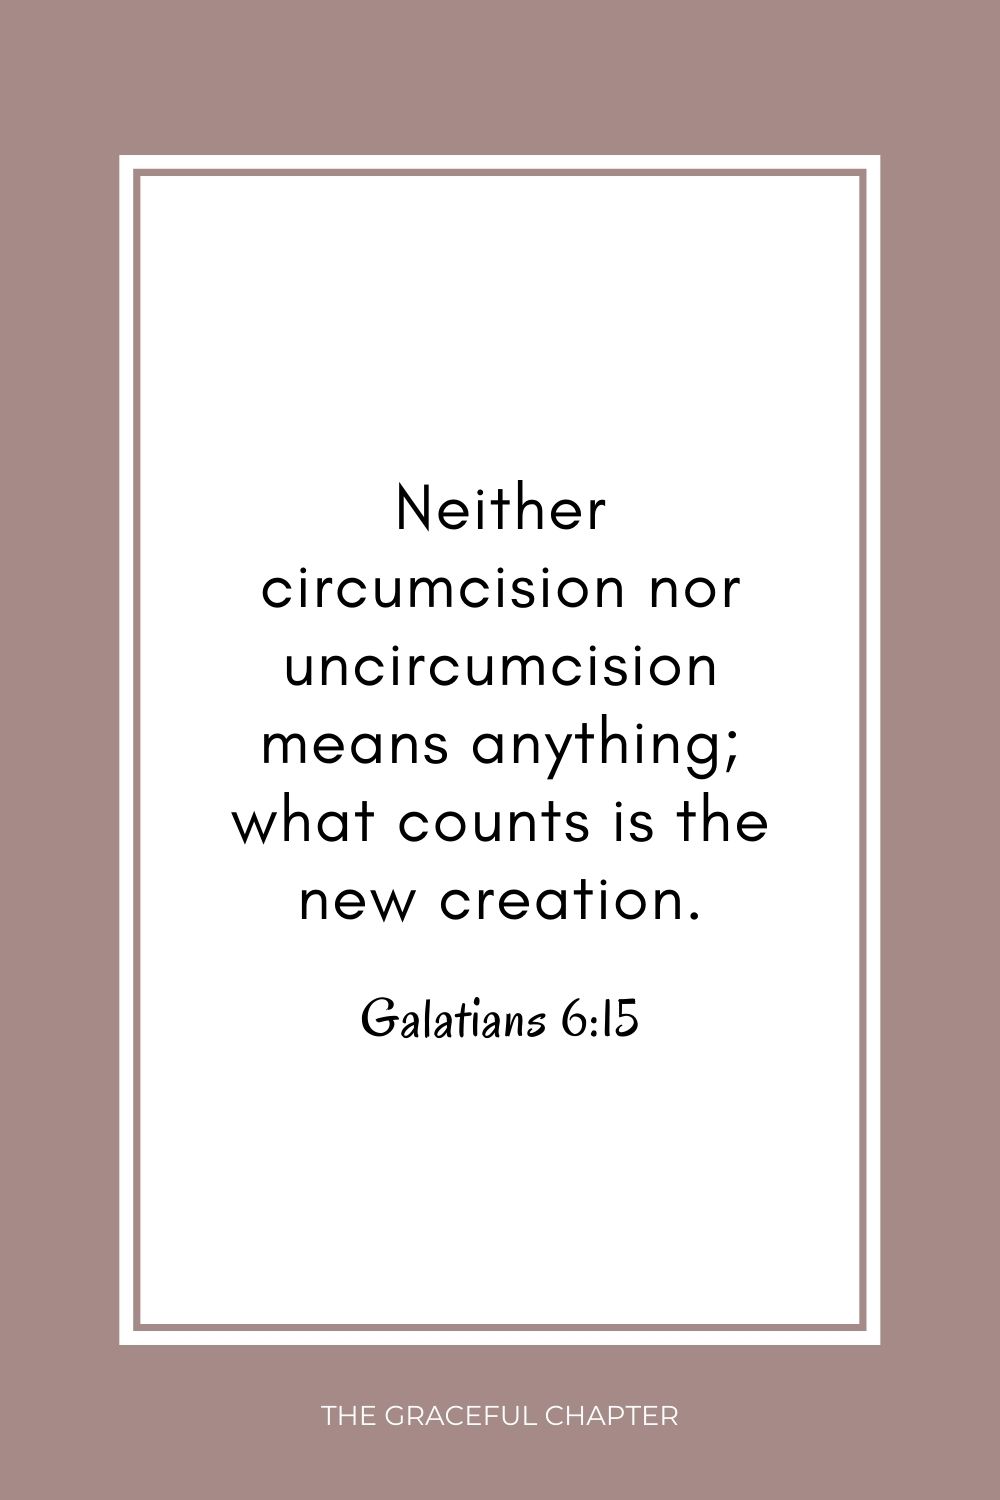 Neither circumcision nor uncircumcision means anything; what counts is the new creation.Neither circumcision nor uncircumcision means anything; what counts is the new creation. Galatians 6:15